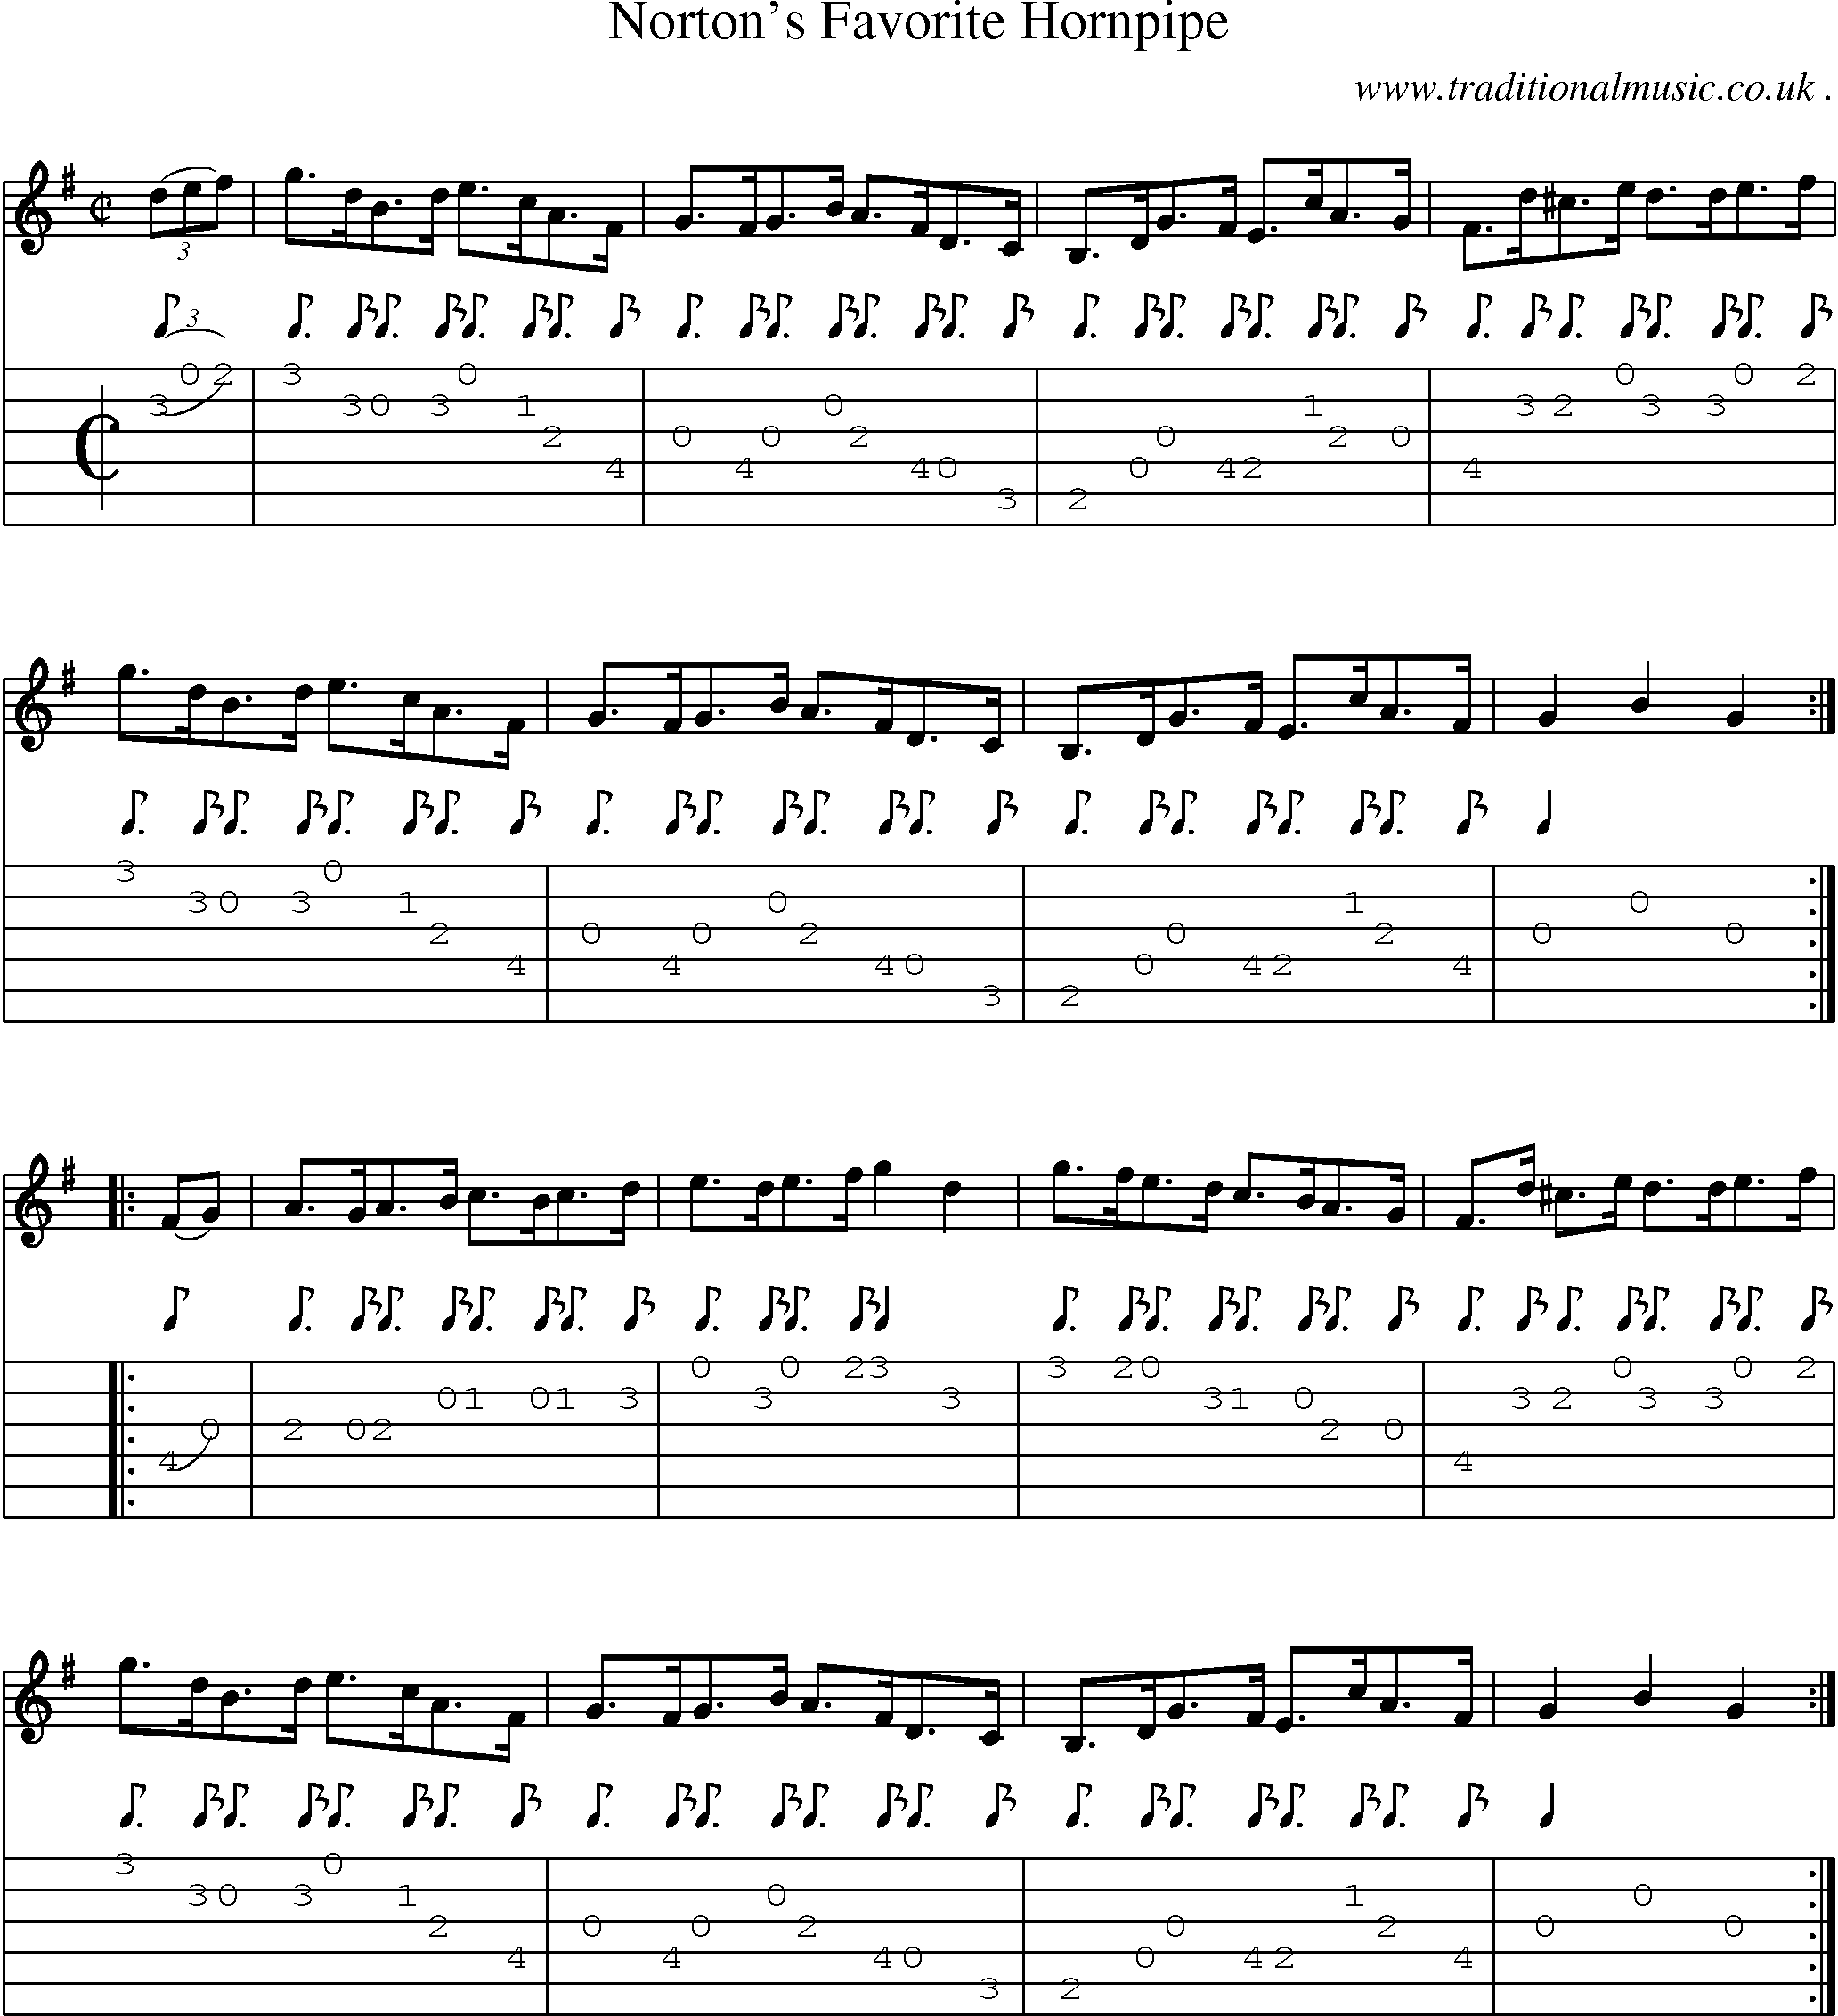 Sheet-Music and Guitar Tabs for Nortons Favorite Hornpipe